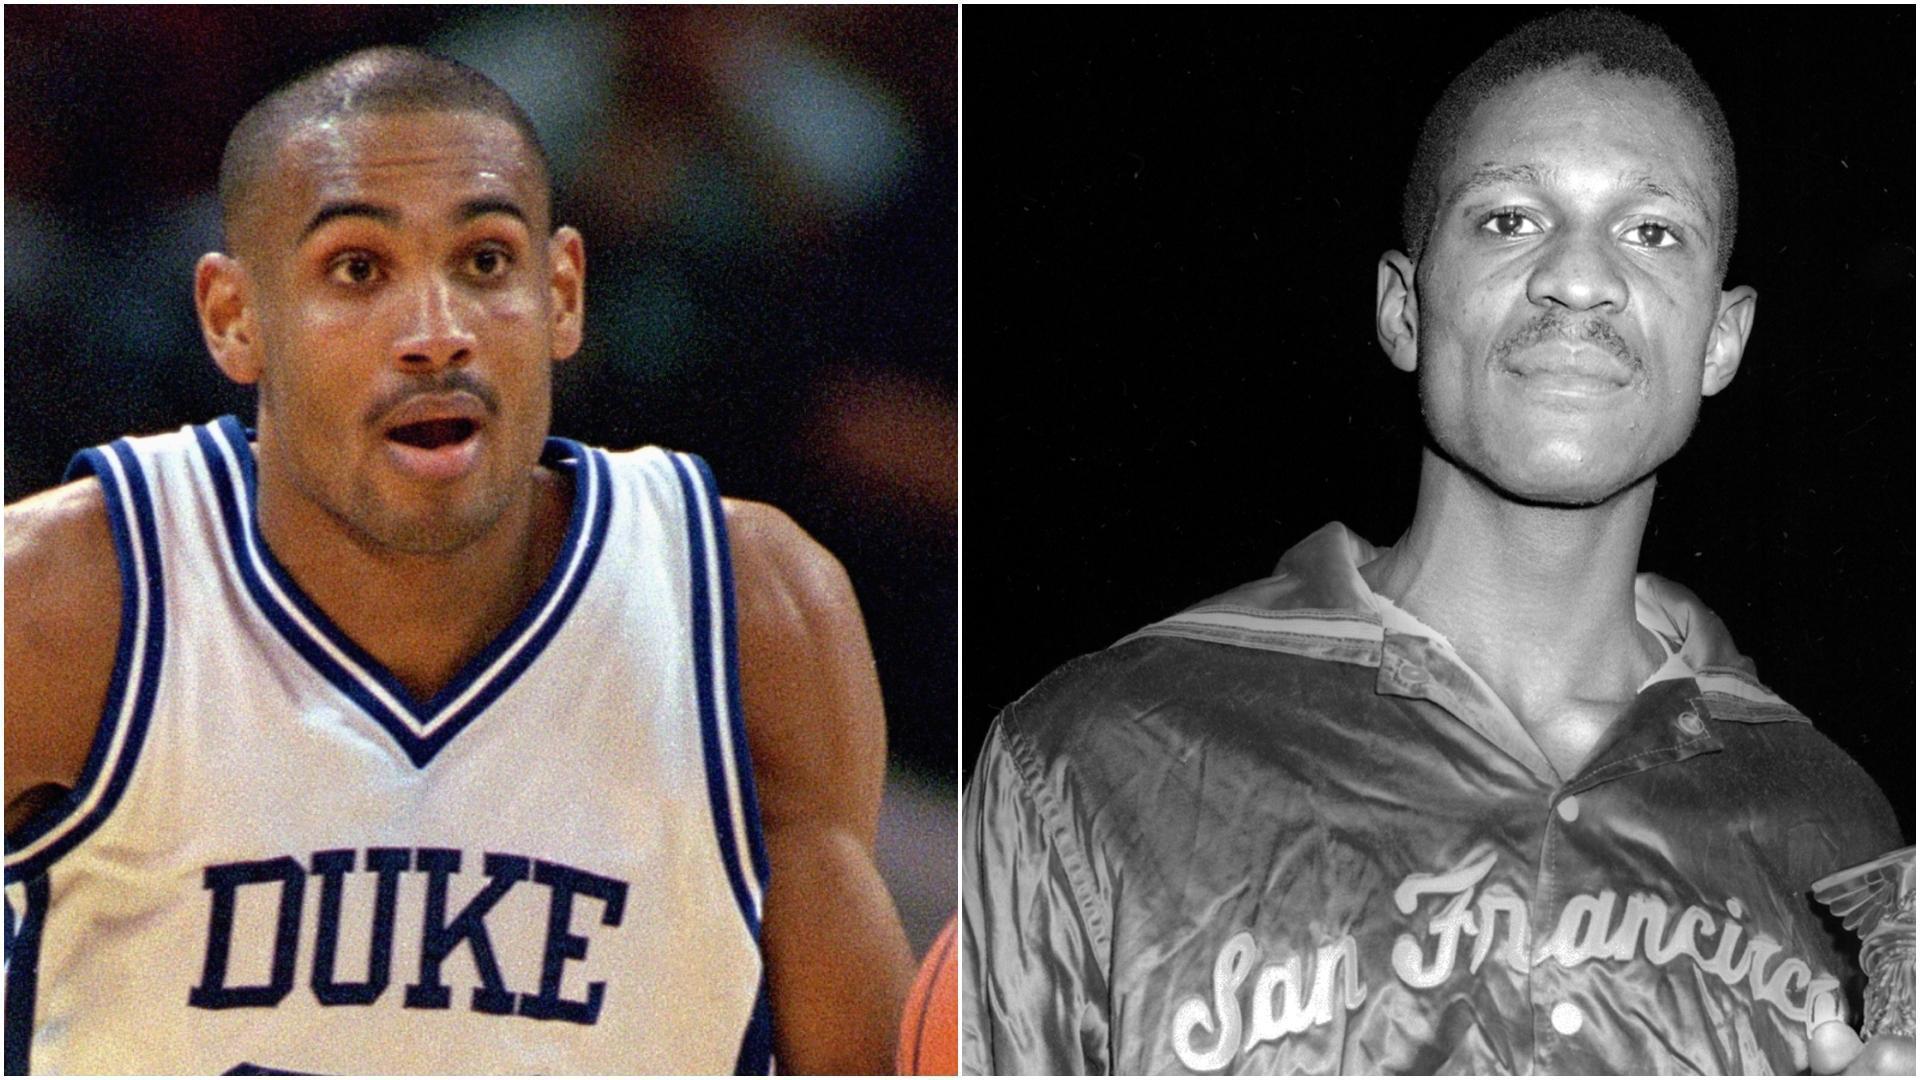 Bill Russell or Grant Hill: Who will advance in bracket matchup?